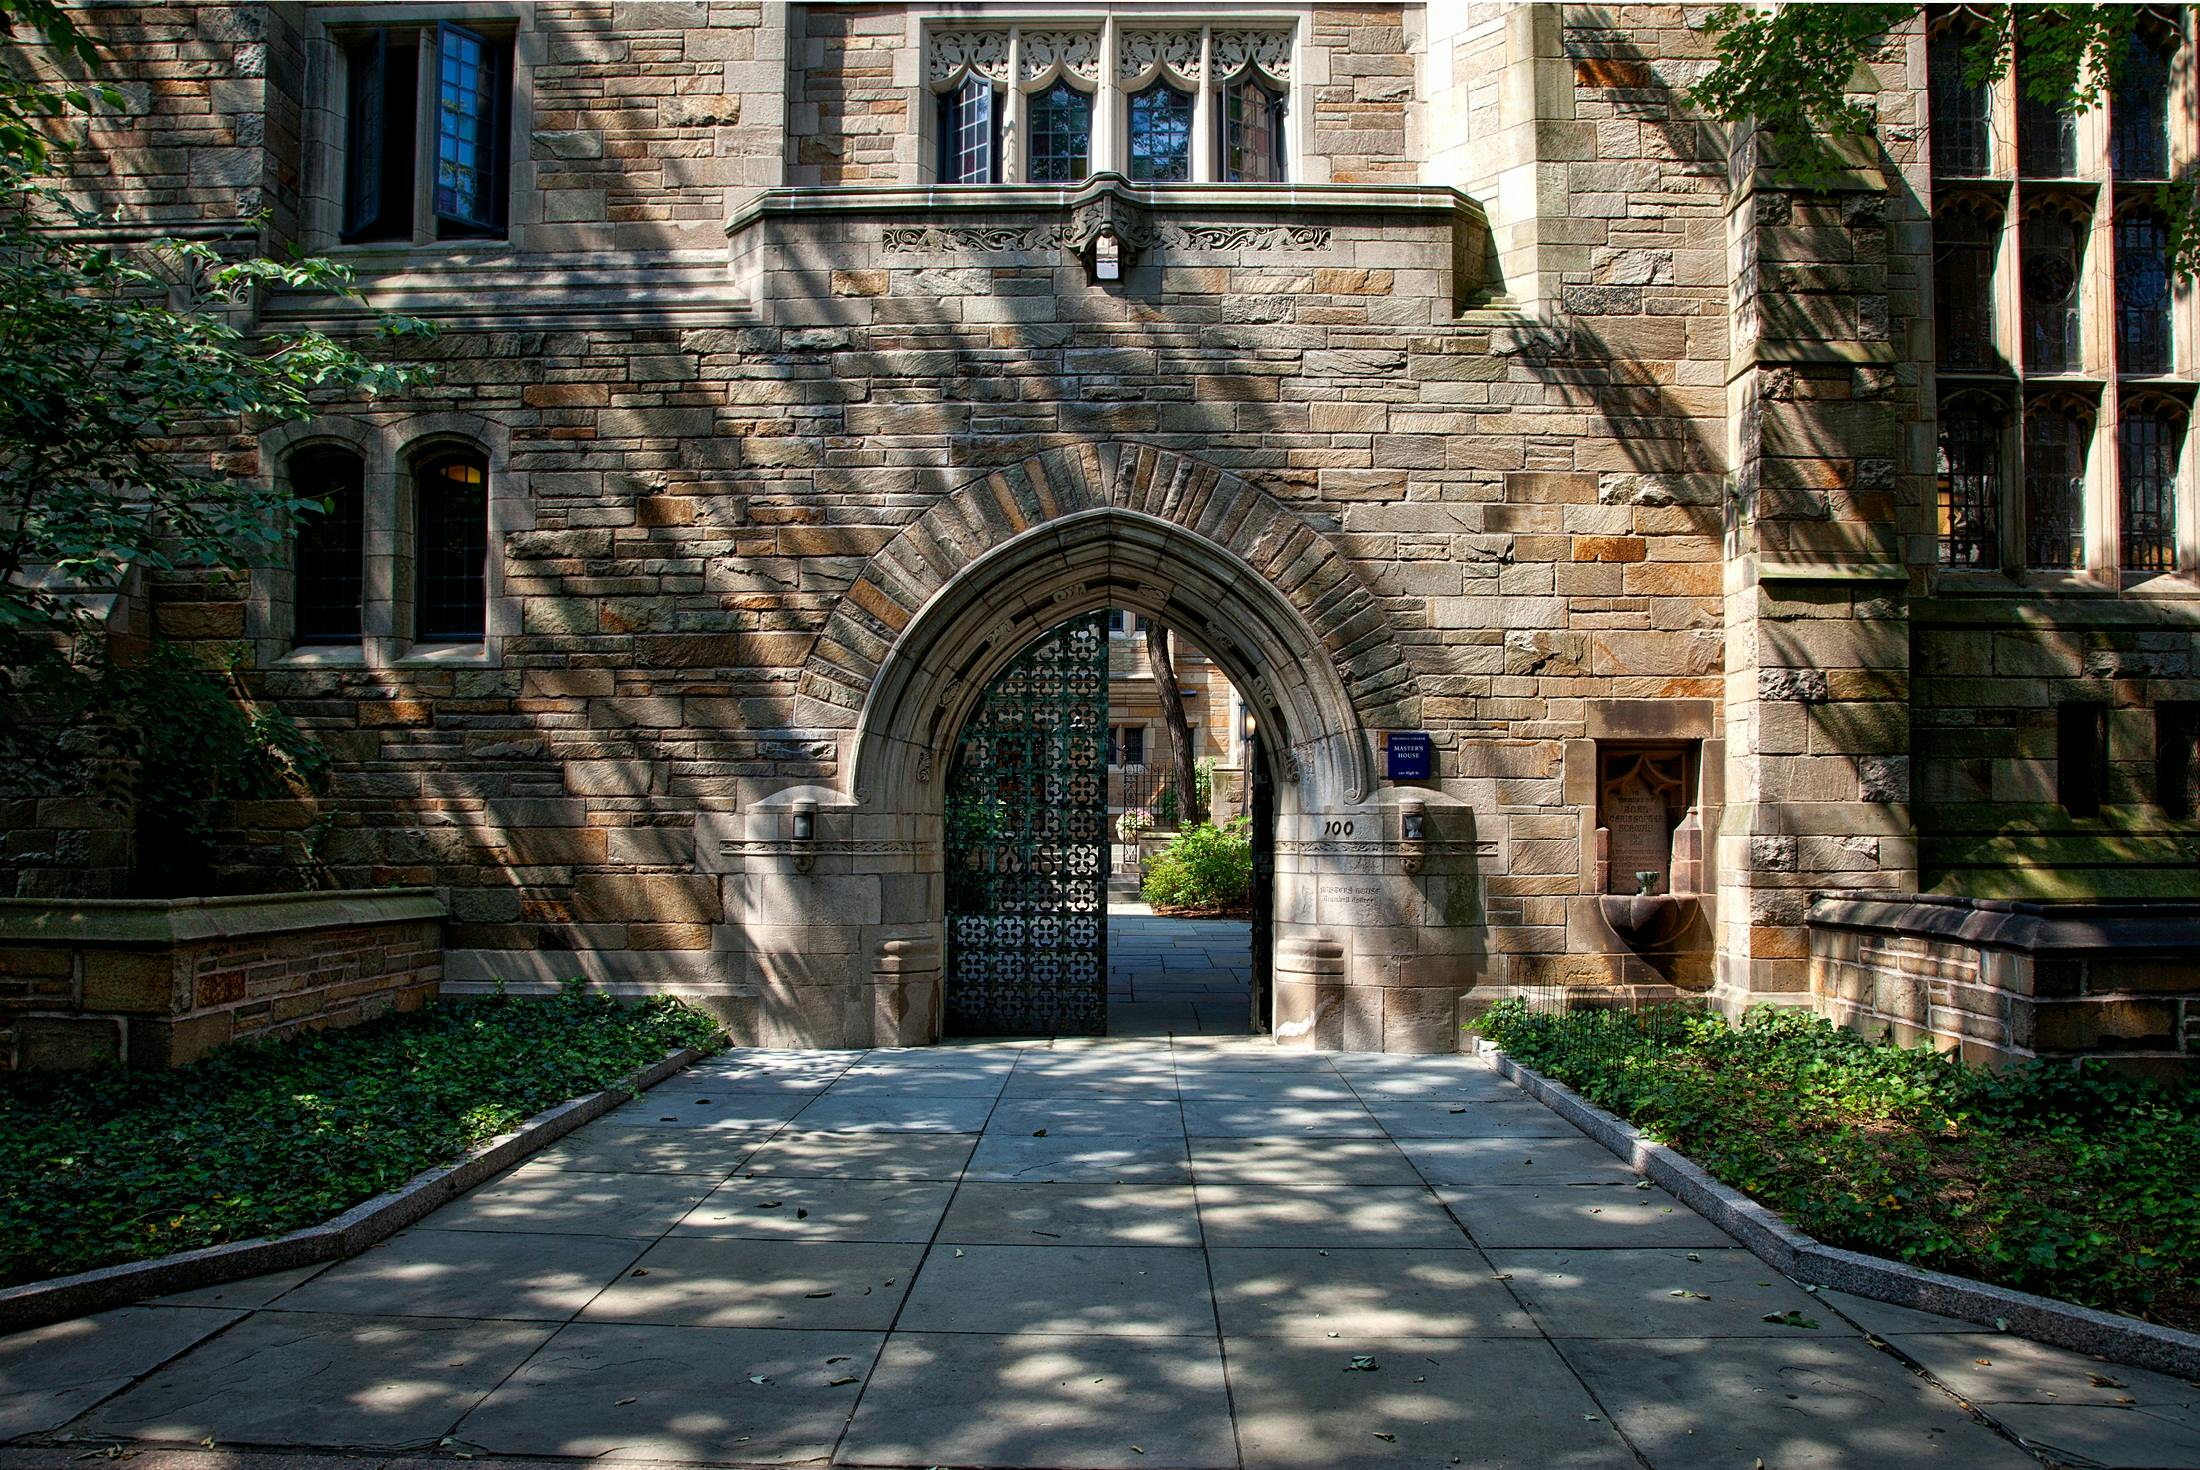 A classic stone university building on campus